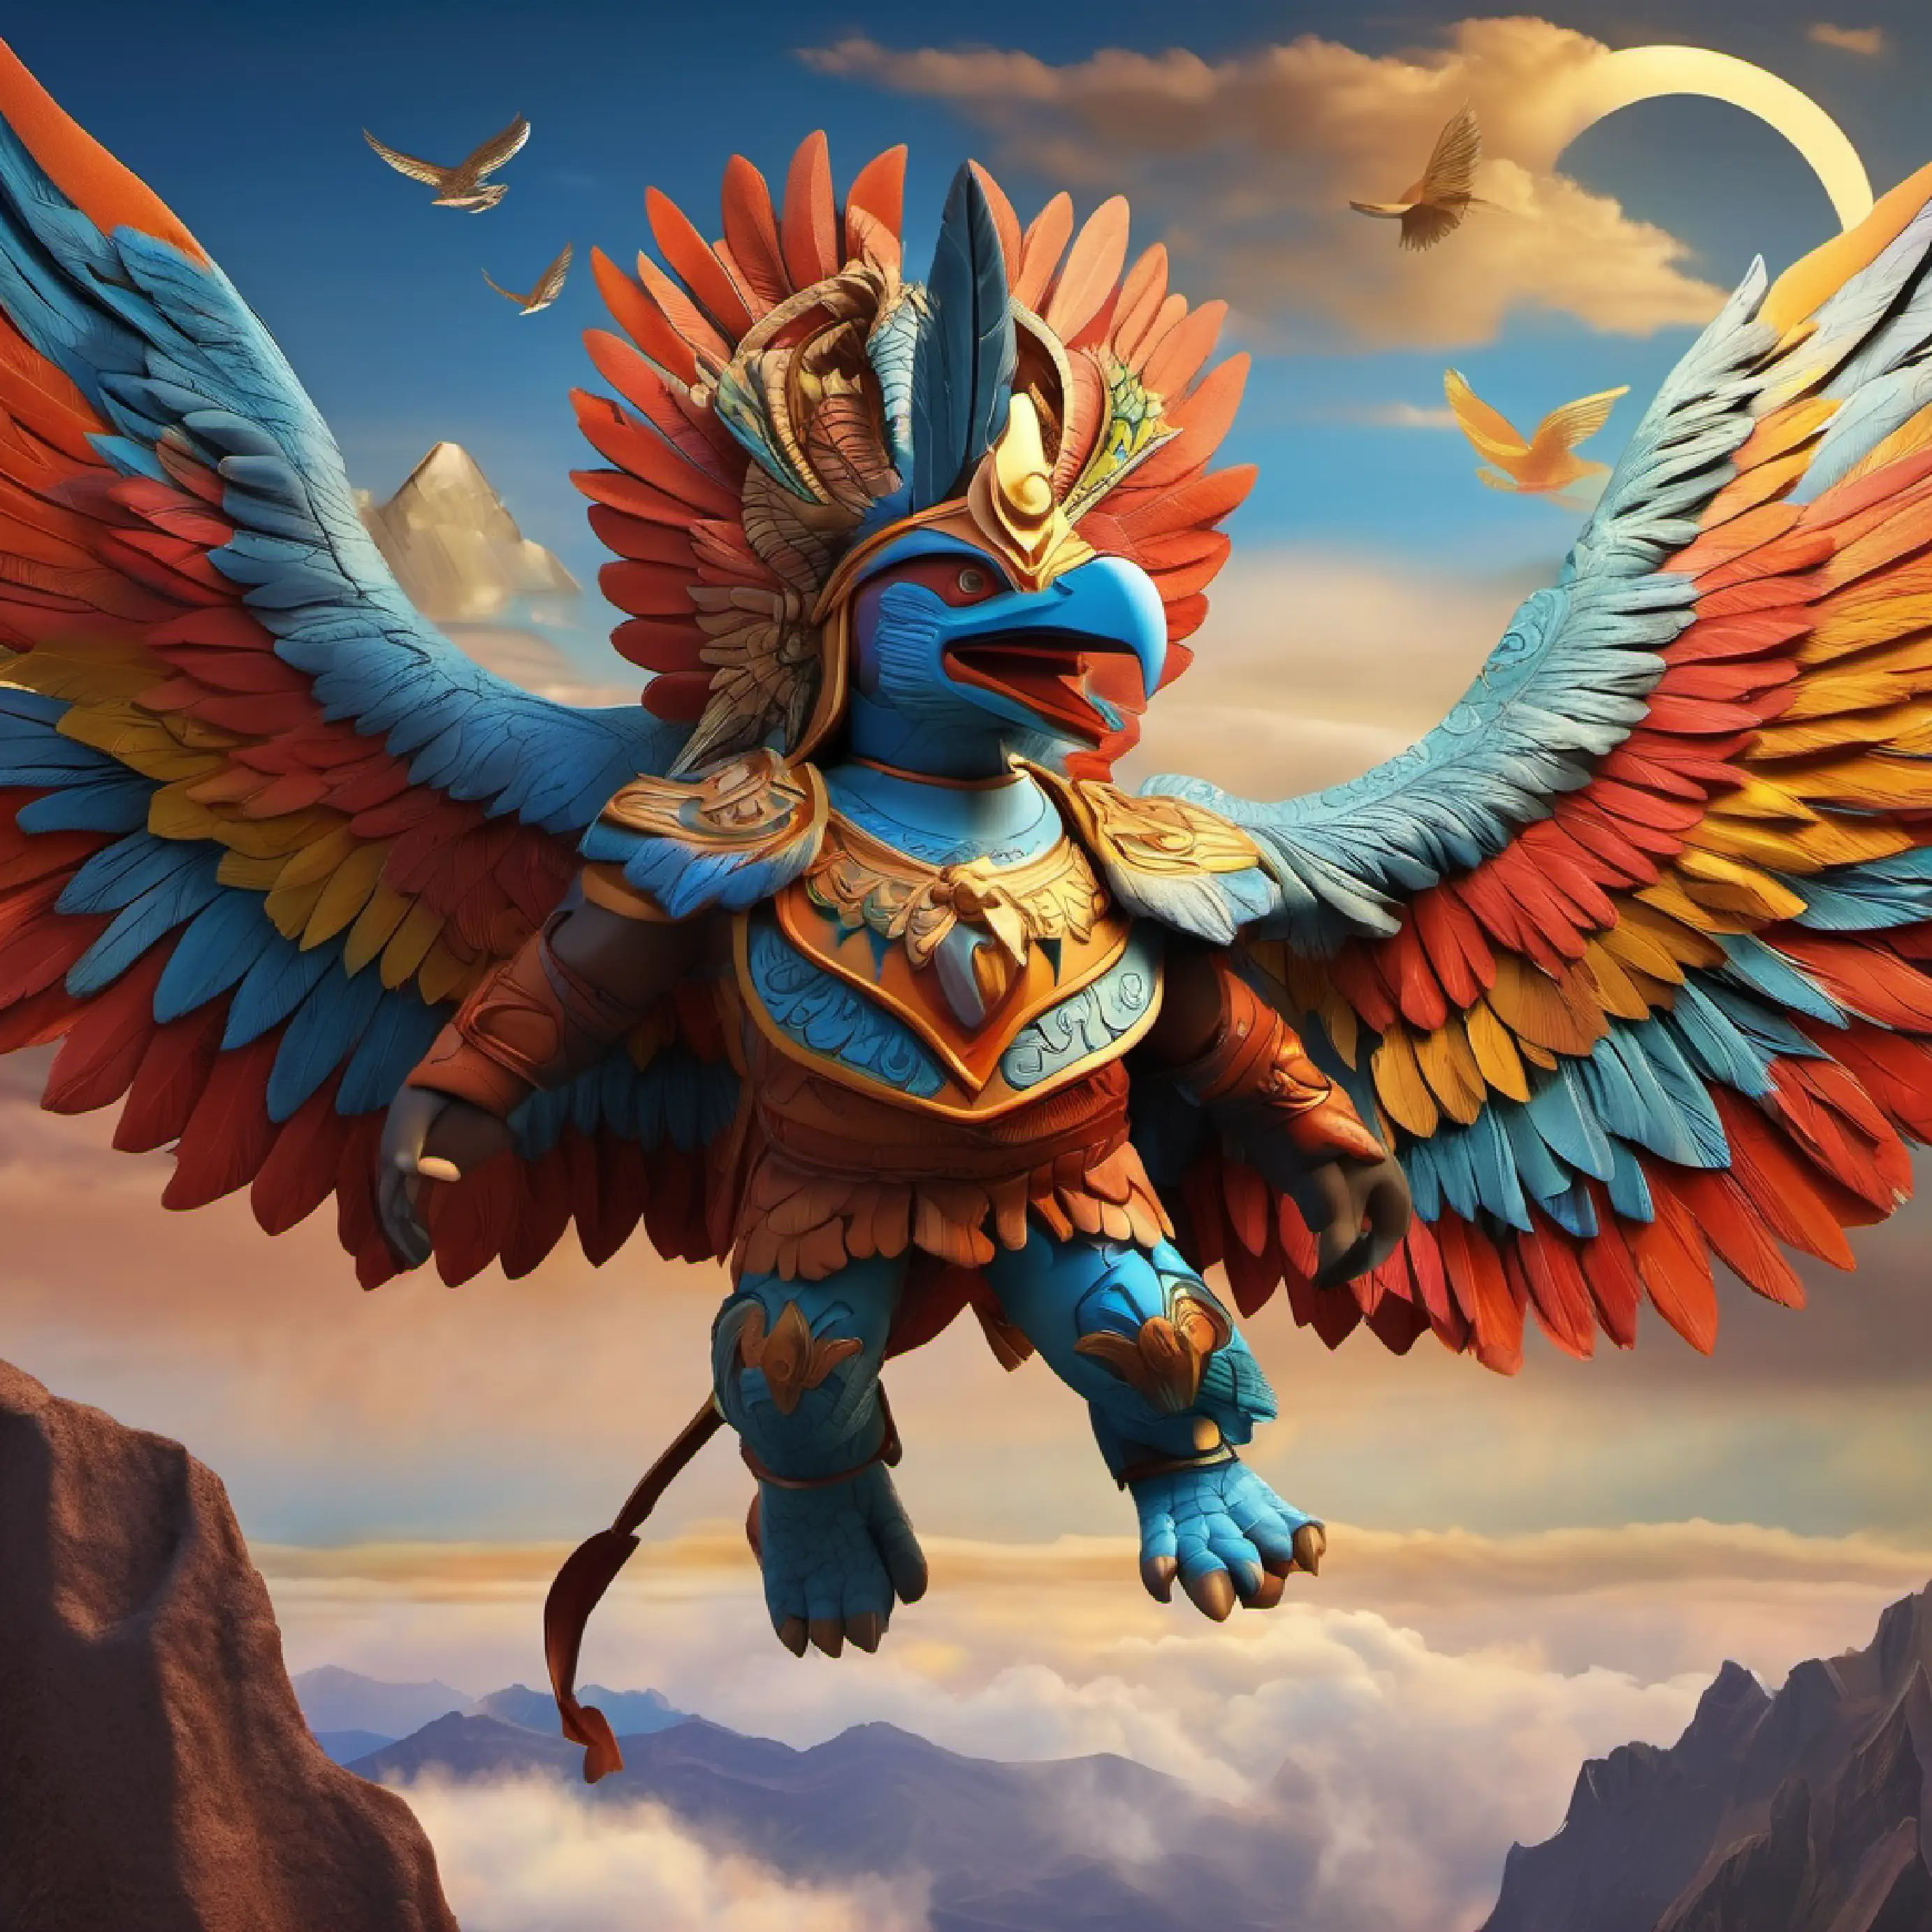 Imagine Garuda, the embodiment of determination, soaring across the heavens on a quest to obtain the elixir of immortality, Amrita, for the freedom of his mother. His wings, vast and powerful, create storms and part the clouds, his armor glistening like a beacon of hope. His helmet, adorned with the feathers of the celestial bird, guides him through obstacles, as the gods and demons alike watch his journey with bated breath."